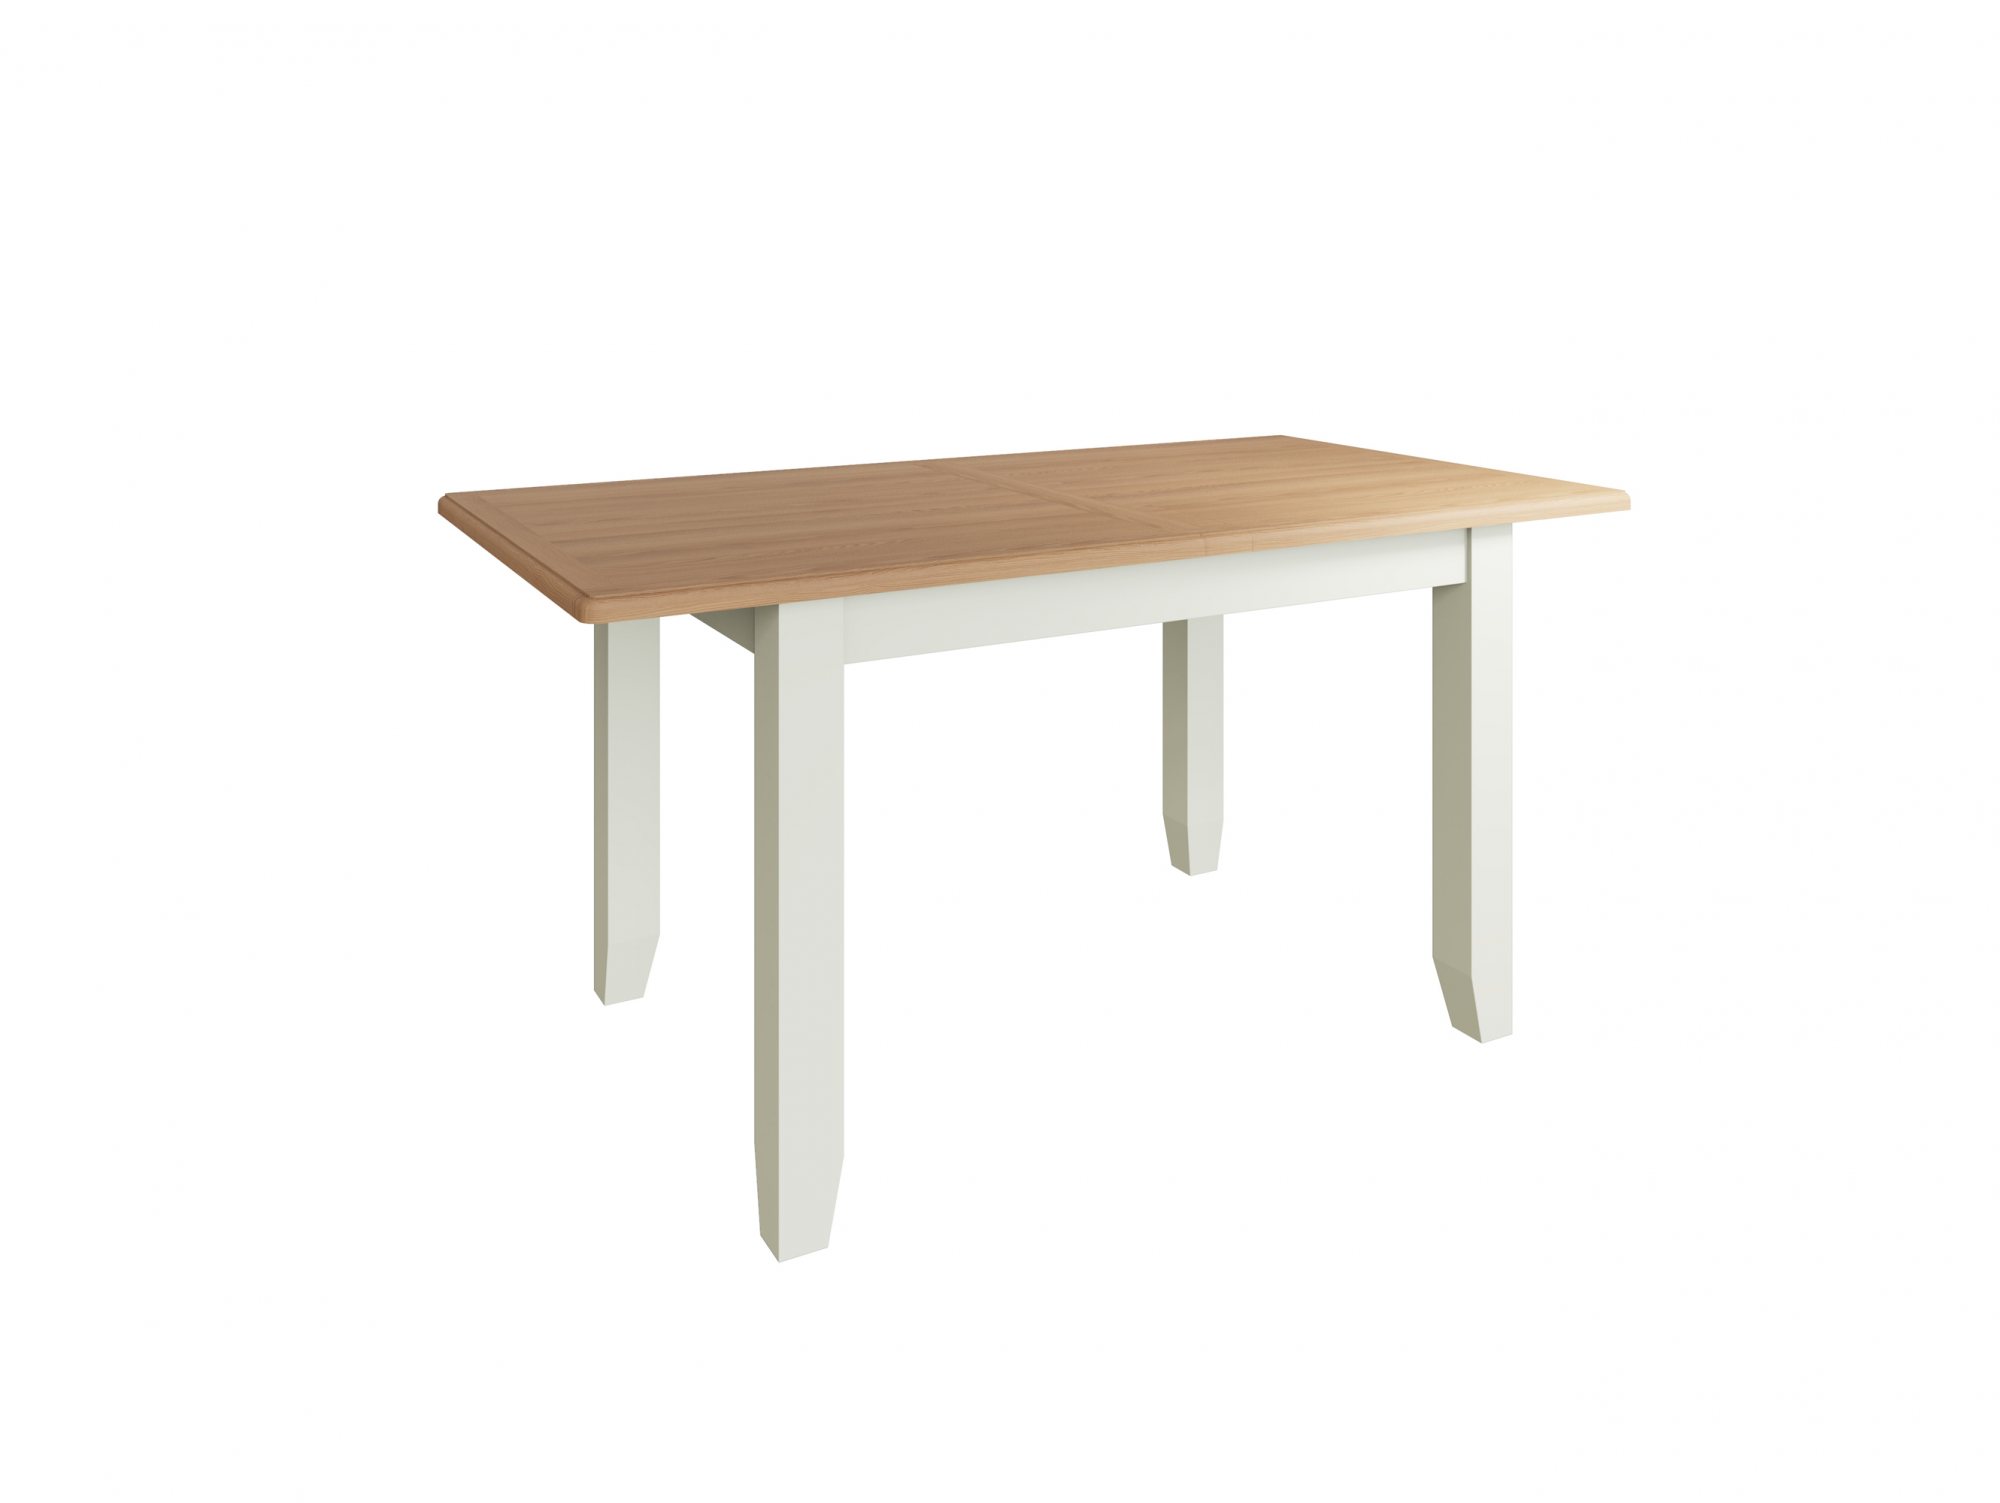 Kenmore Kenmore Patterdale 160cm White and Oak Butterfly Extending Wooden Dining Table (Flat Packed)